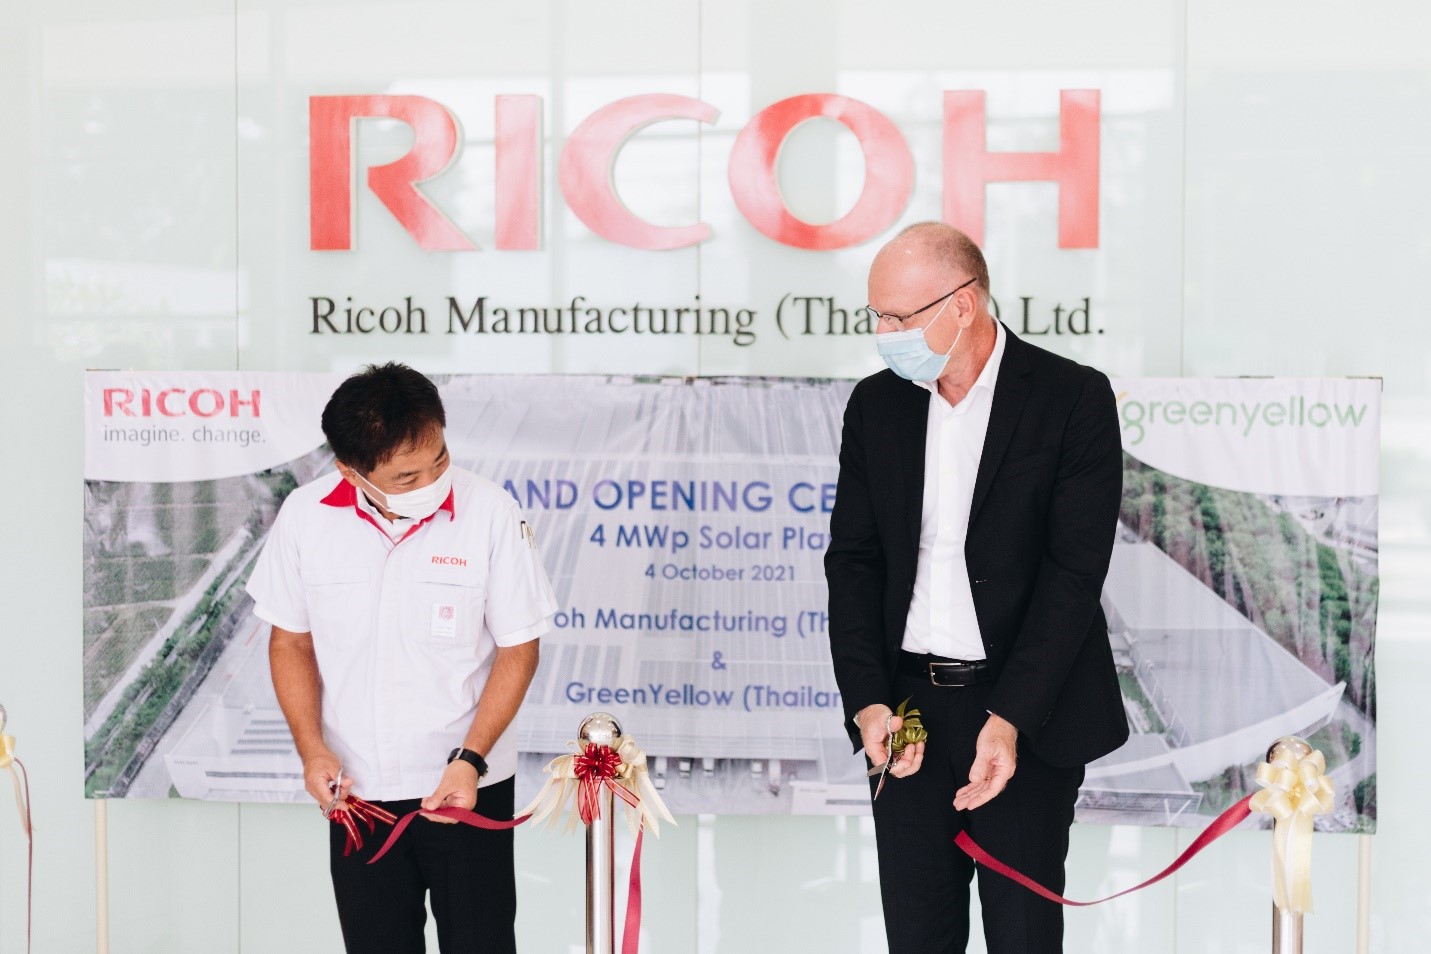 Ceremonial : Ricoh partners with GreenYellow to supply solar power from rooftop PV system as part of its ‘Net Zero’ GHG emissions target by 2050